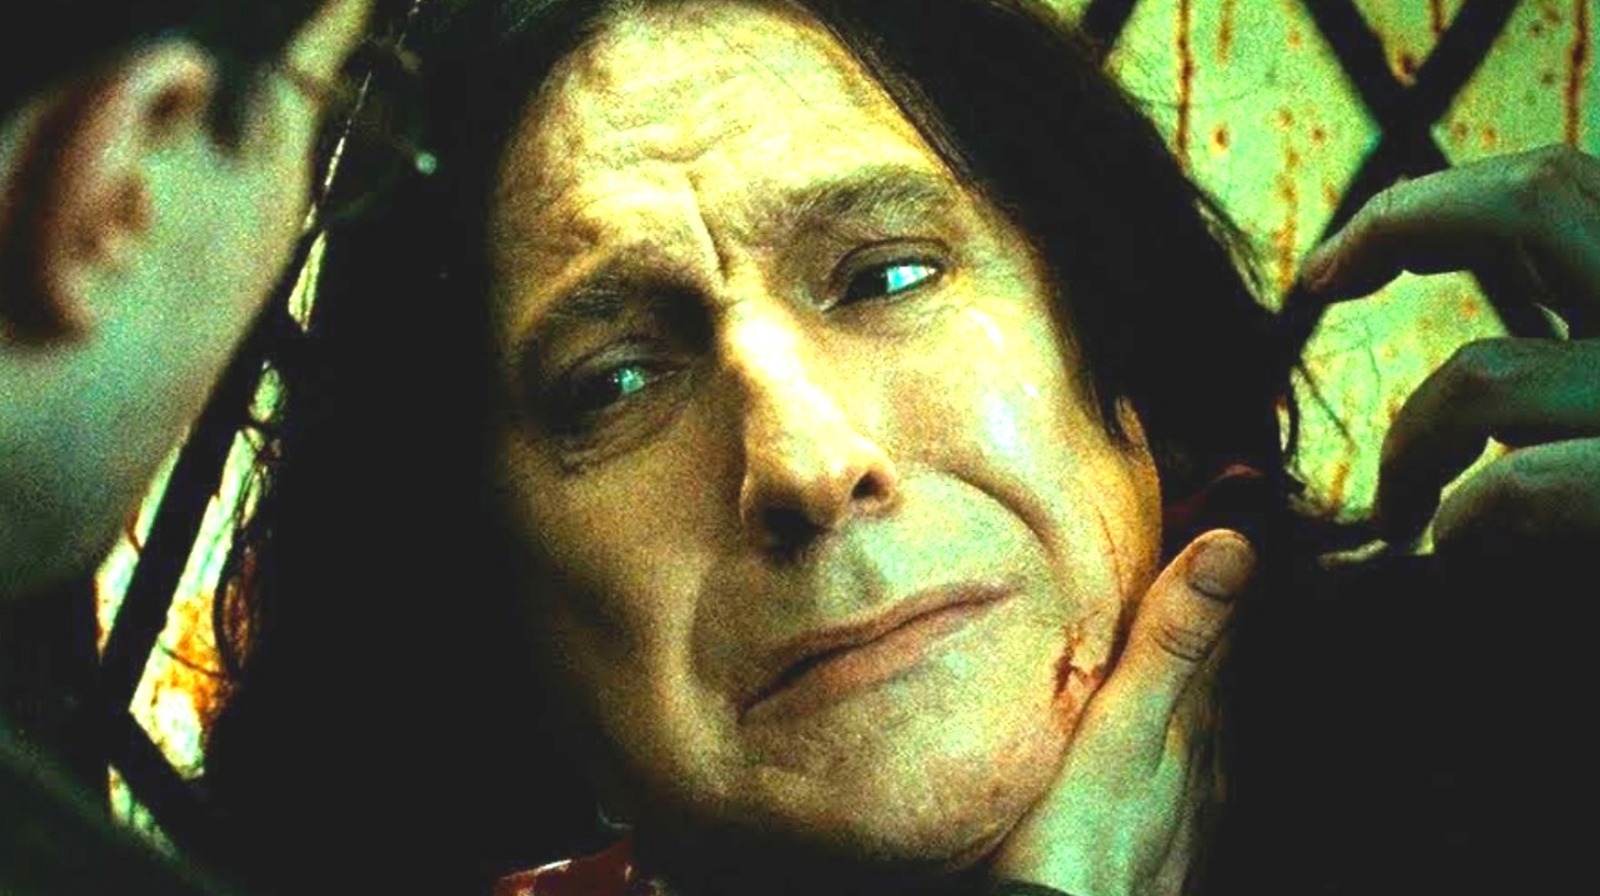 SNAPE GOOD OR BAD - All of the above shows that Snape is no longer the person he used to be. However, the clear evidence for Snape's change lies in his decision at the moment of death. He knew that if he showed Harry his memories, he would choose to sacrifice himself to destroy Voldemort, but he did so anyway. 